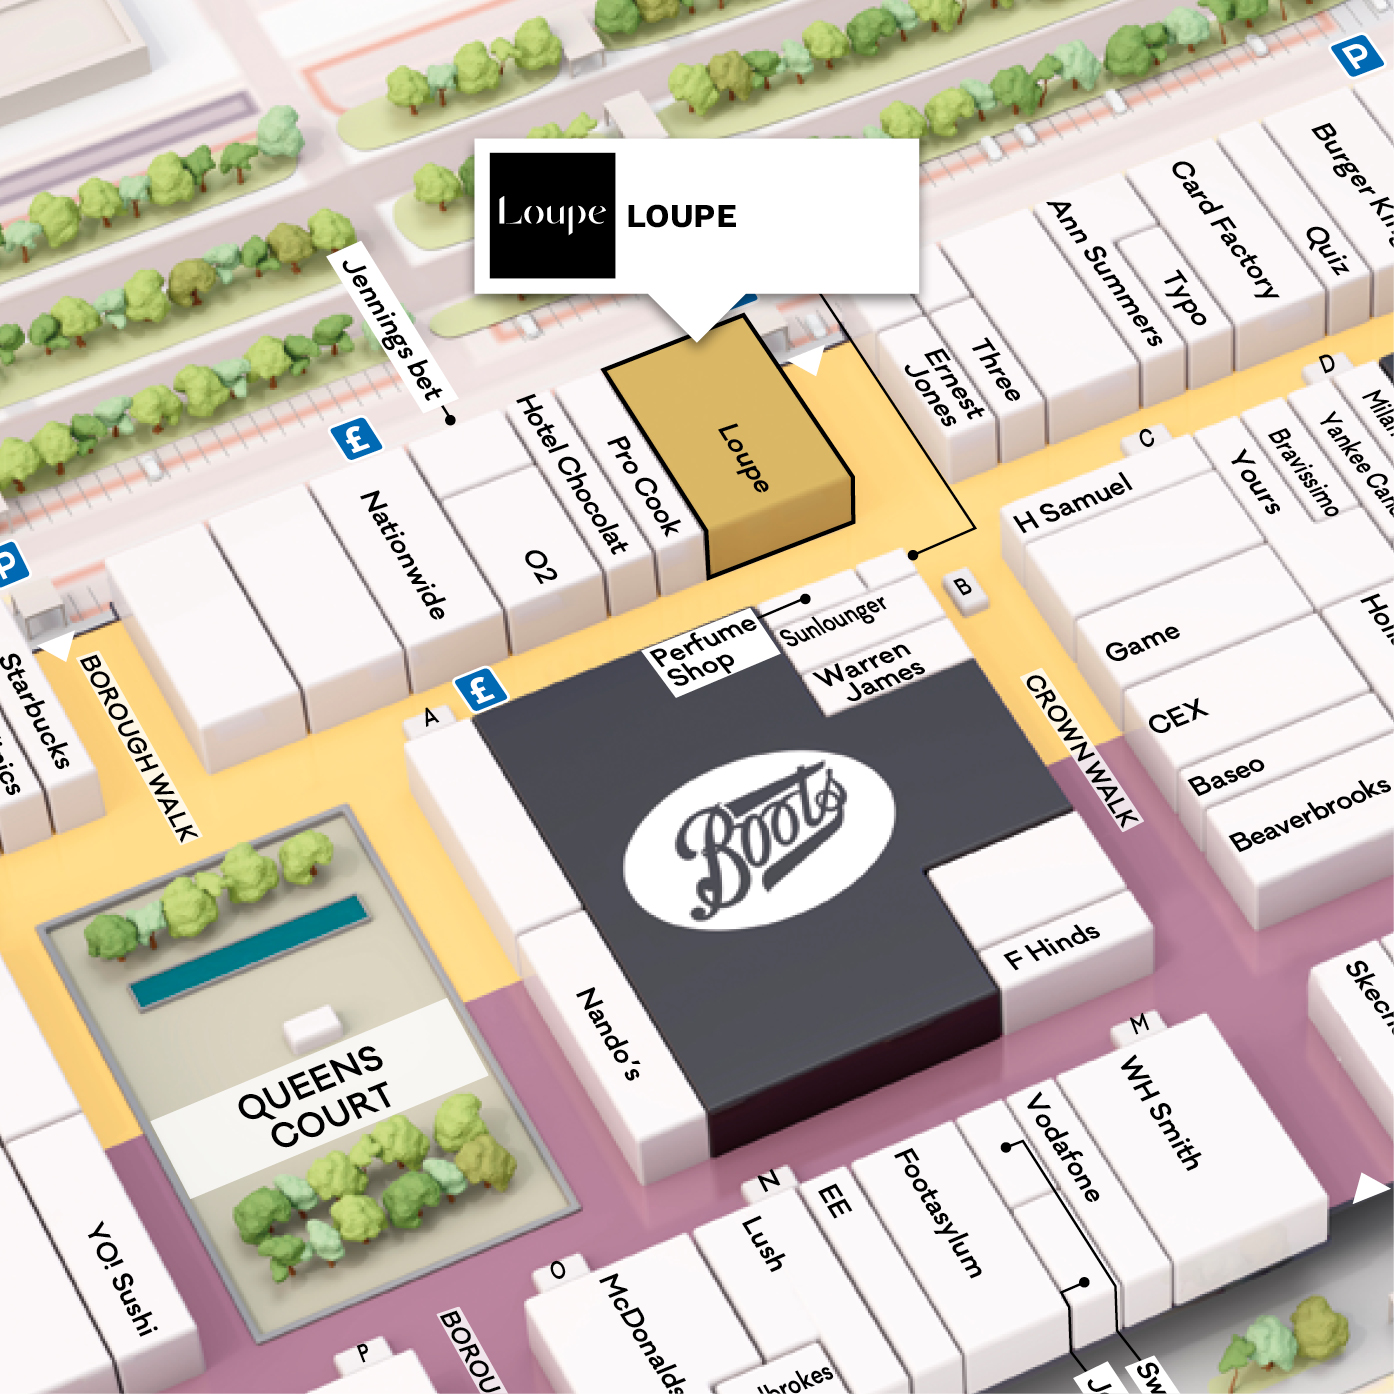 Loupe New Retailer Page Map Image